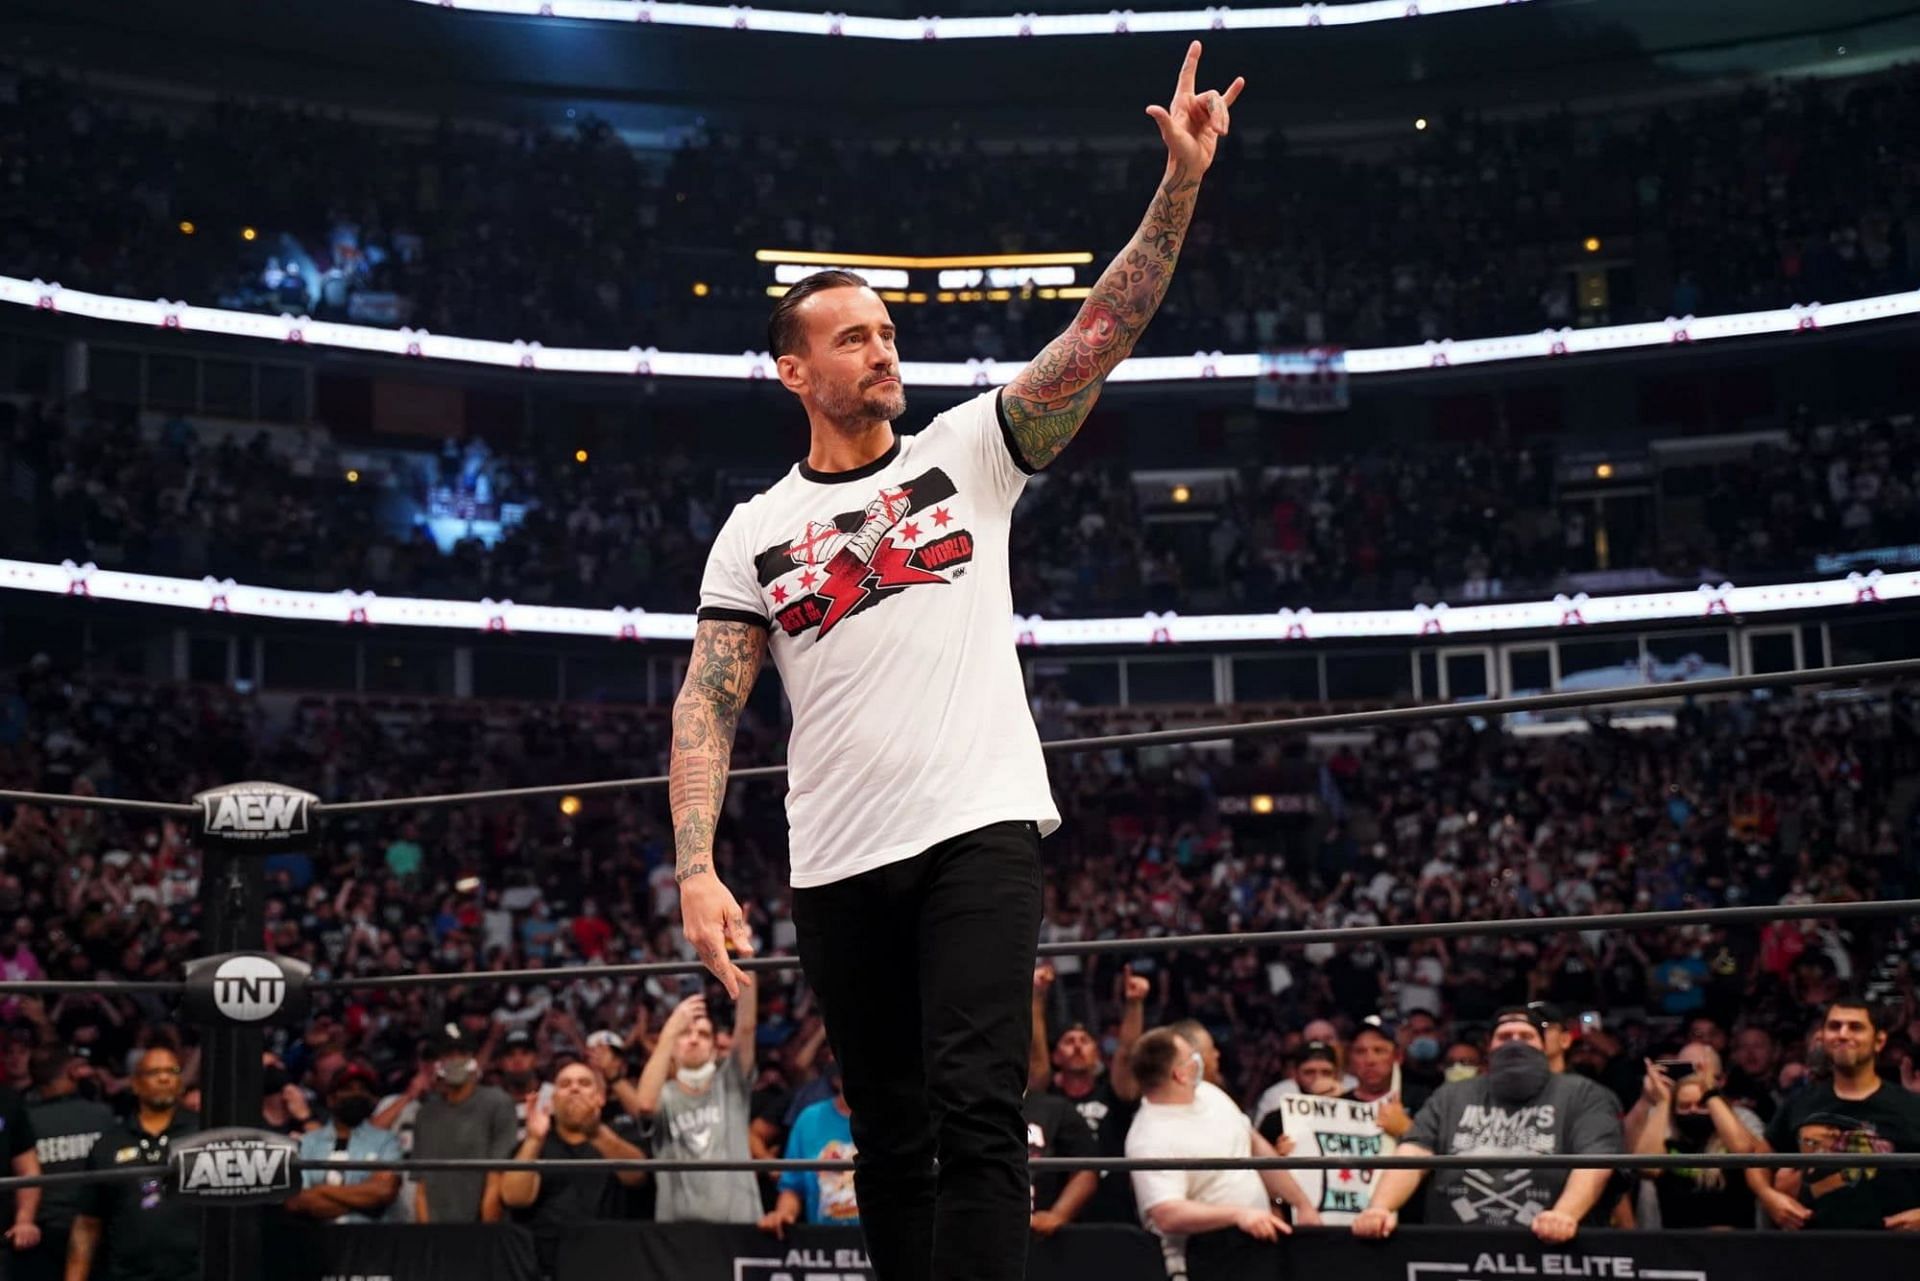 Serena Deeb revealed that she would love to team up with CM Punk again while in AEW